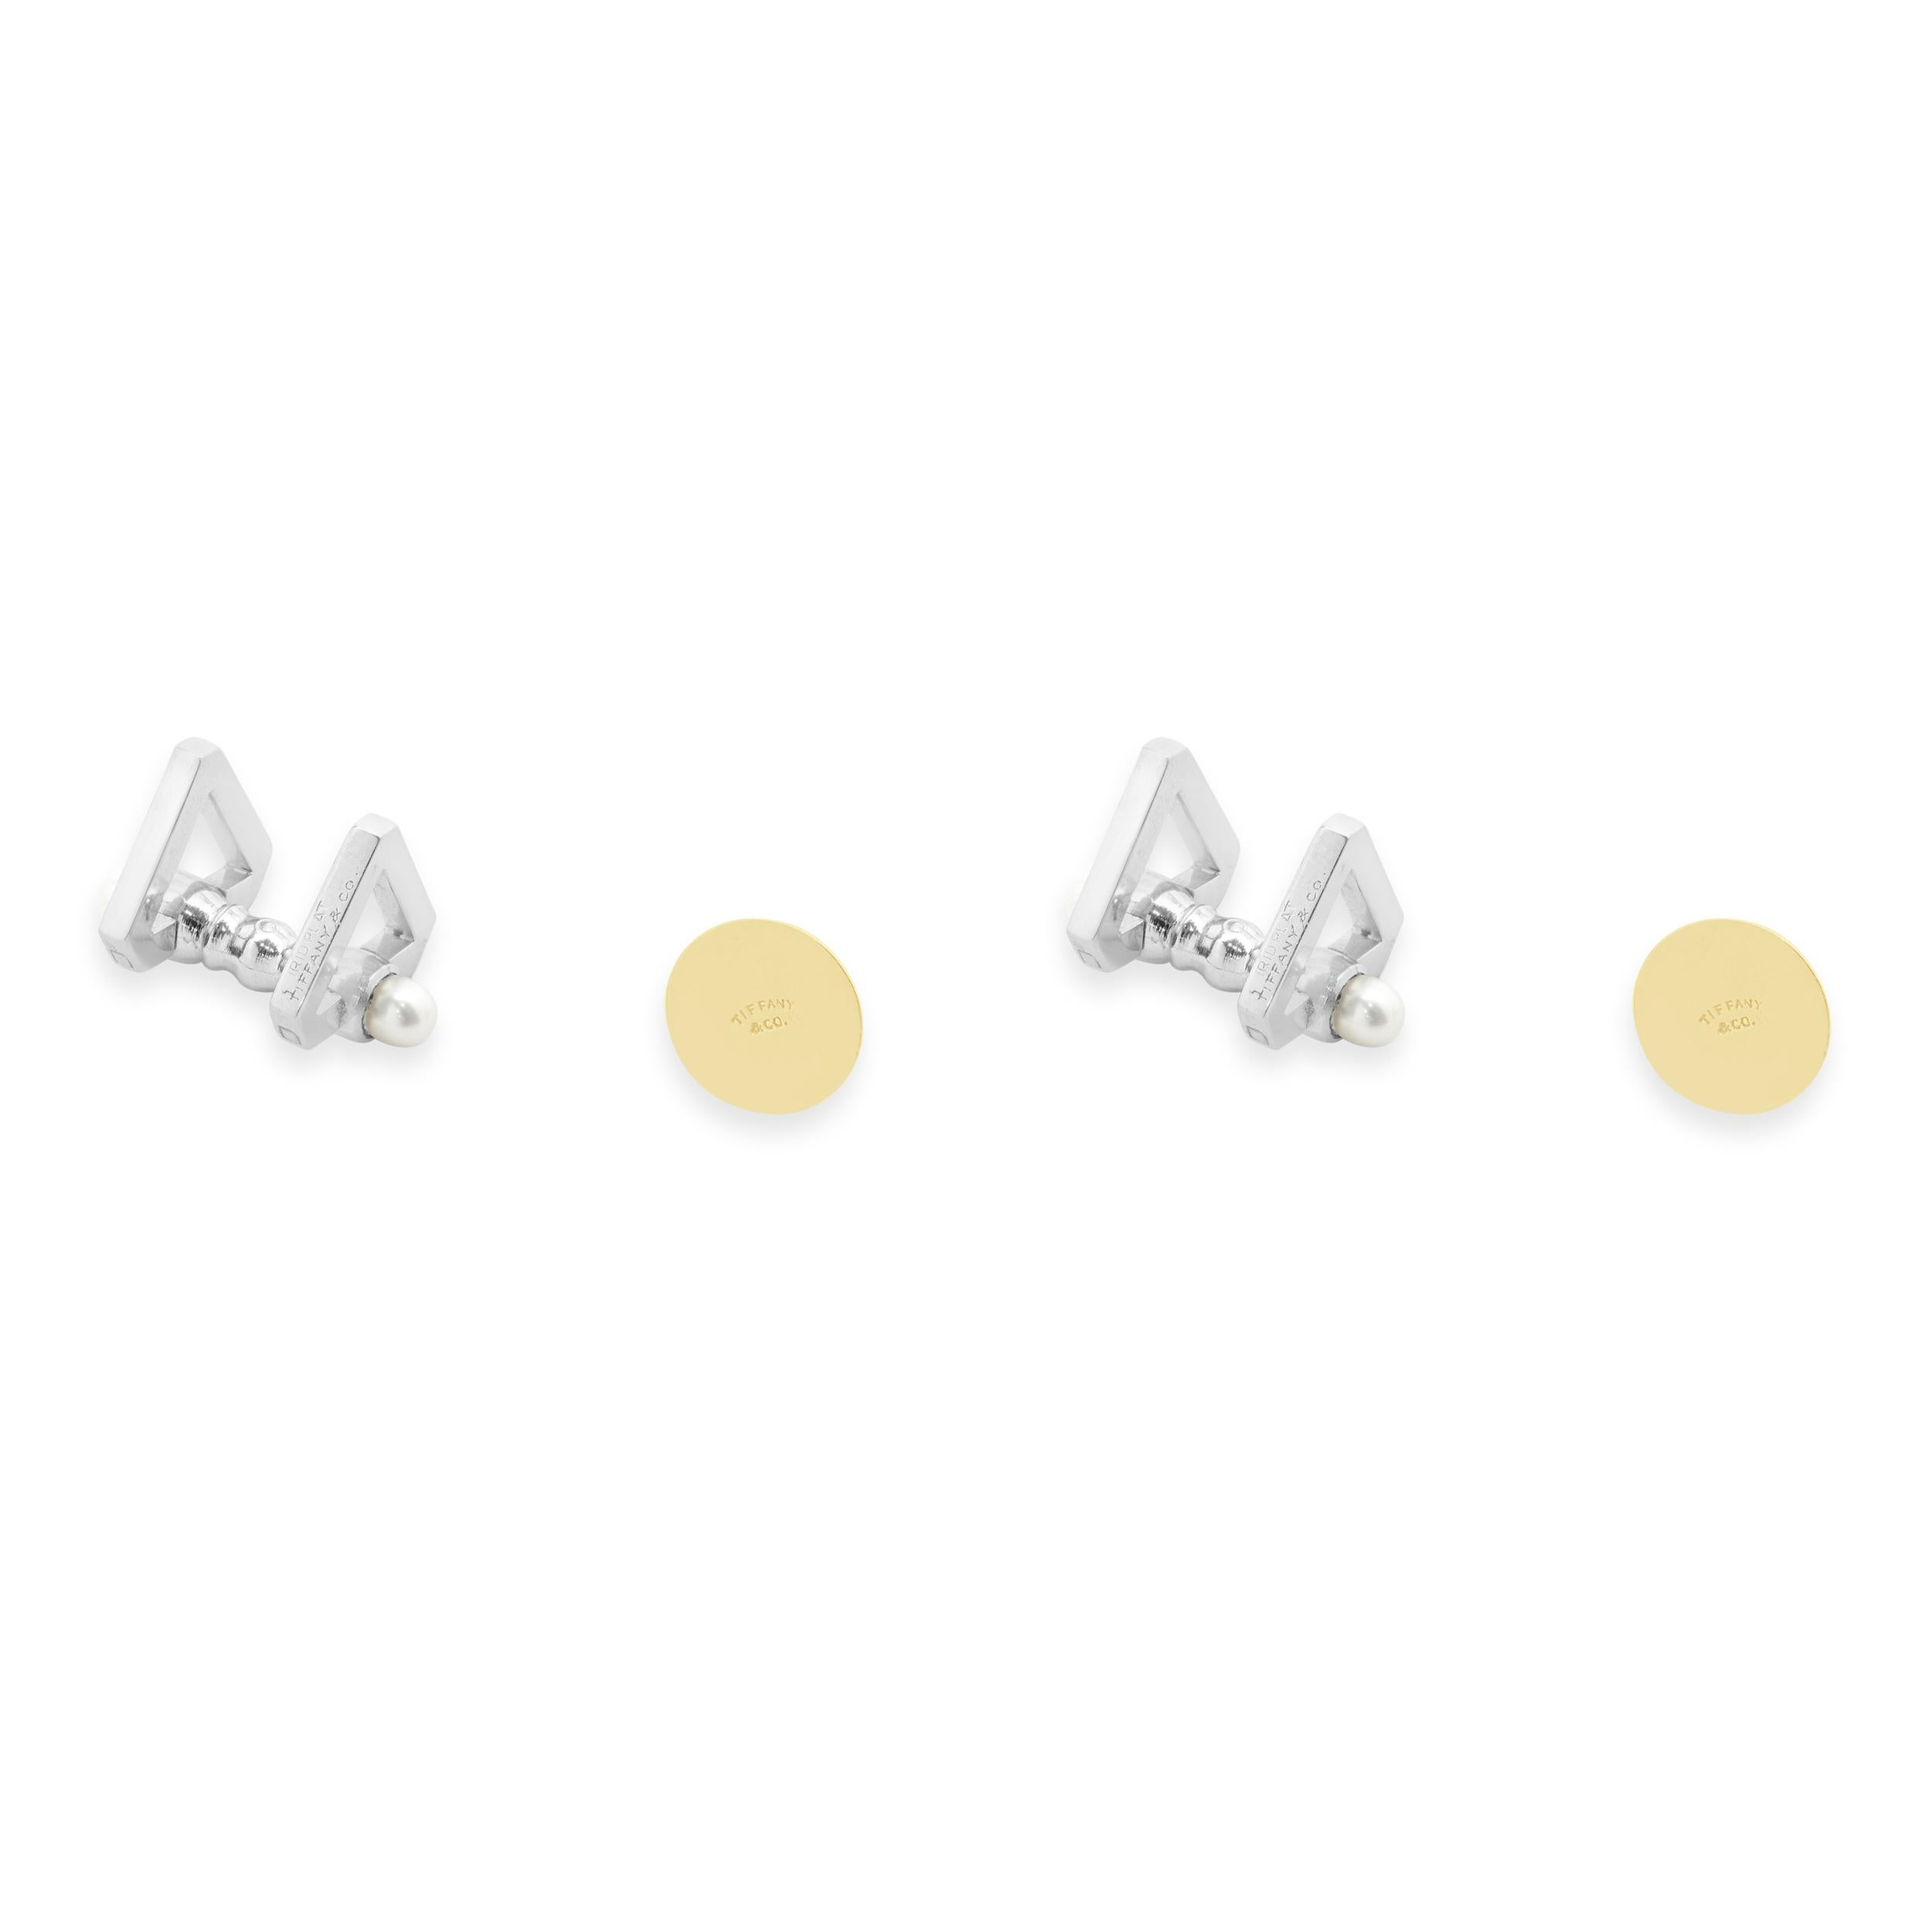 Round Cut Tiffany & Co. Platinum Cufflinks and 18k Yellow Gold 5mm Pearl Studs Tuxedo Set For Sale